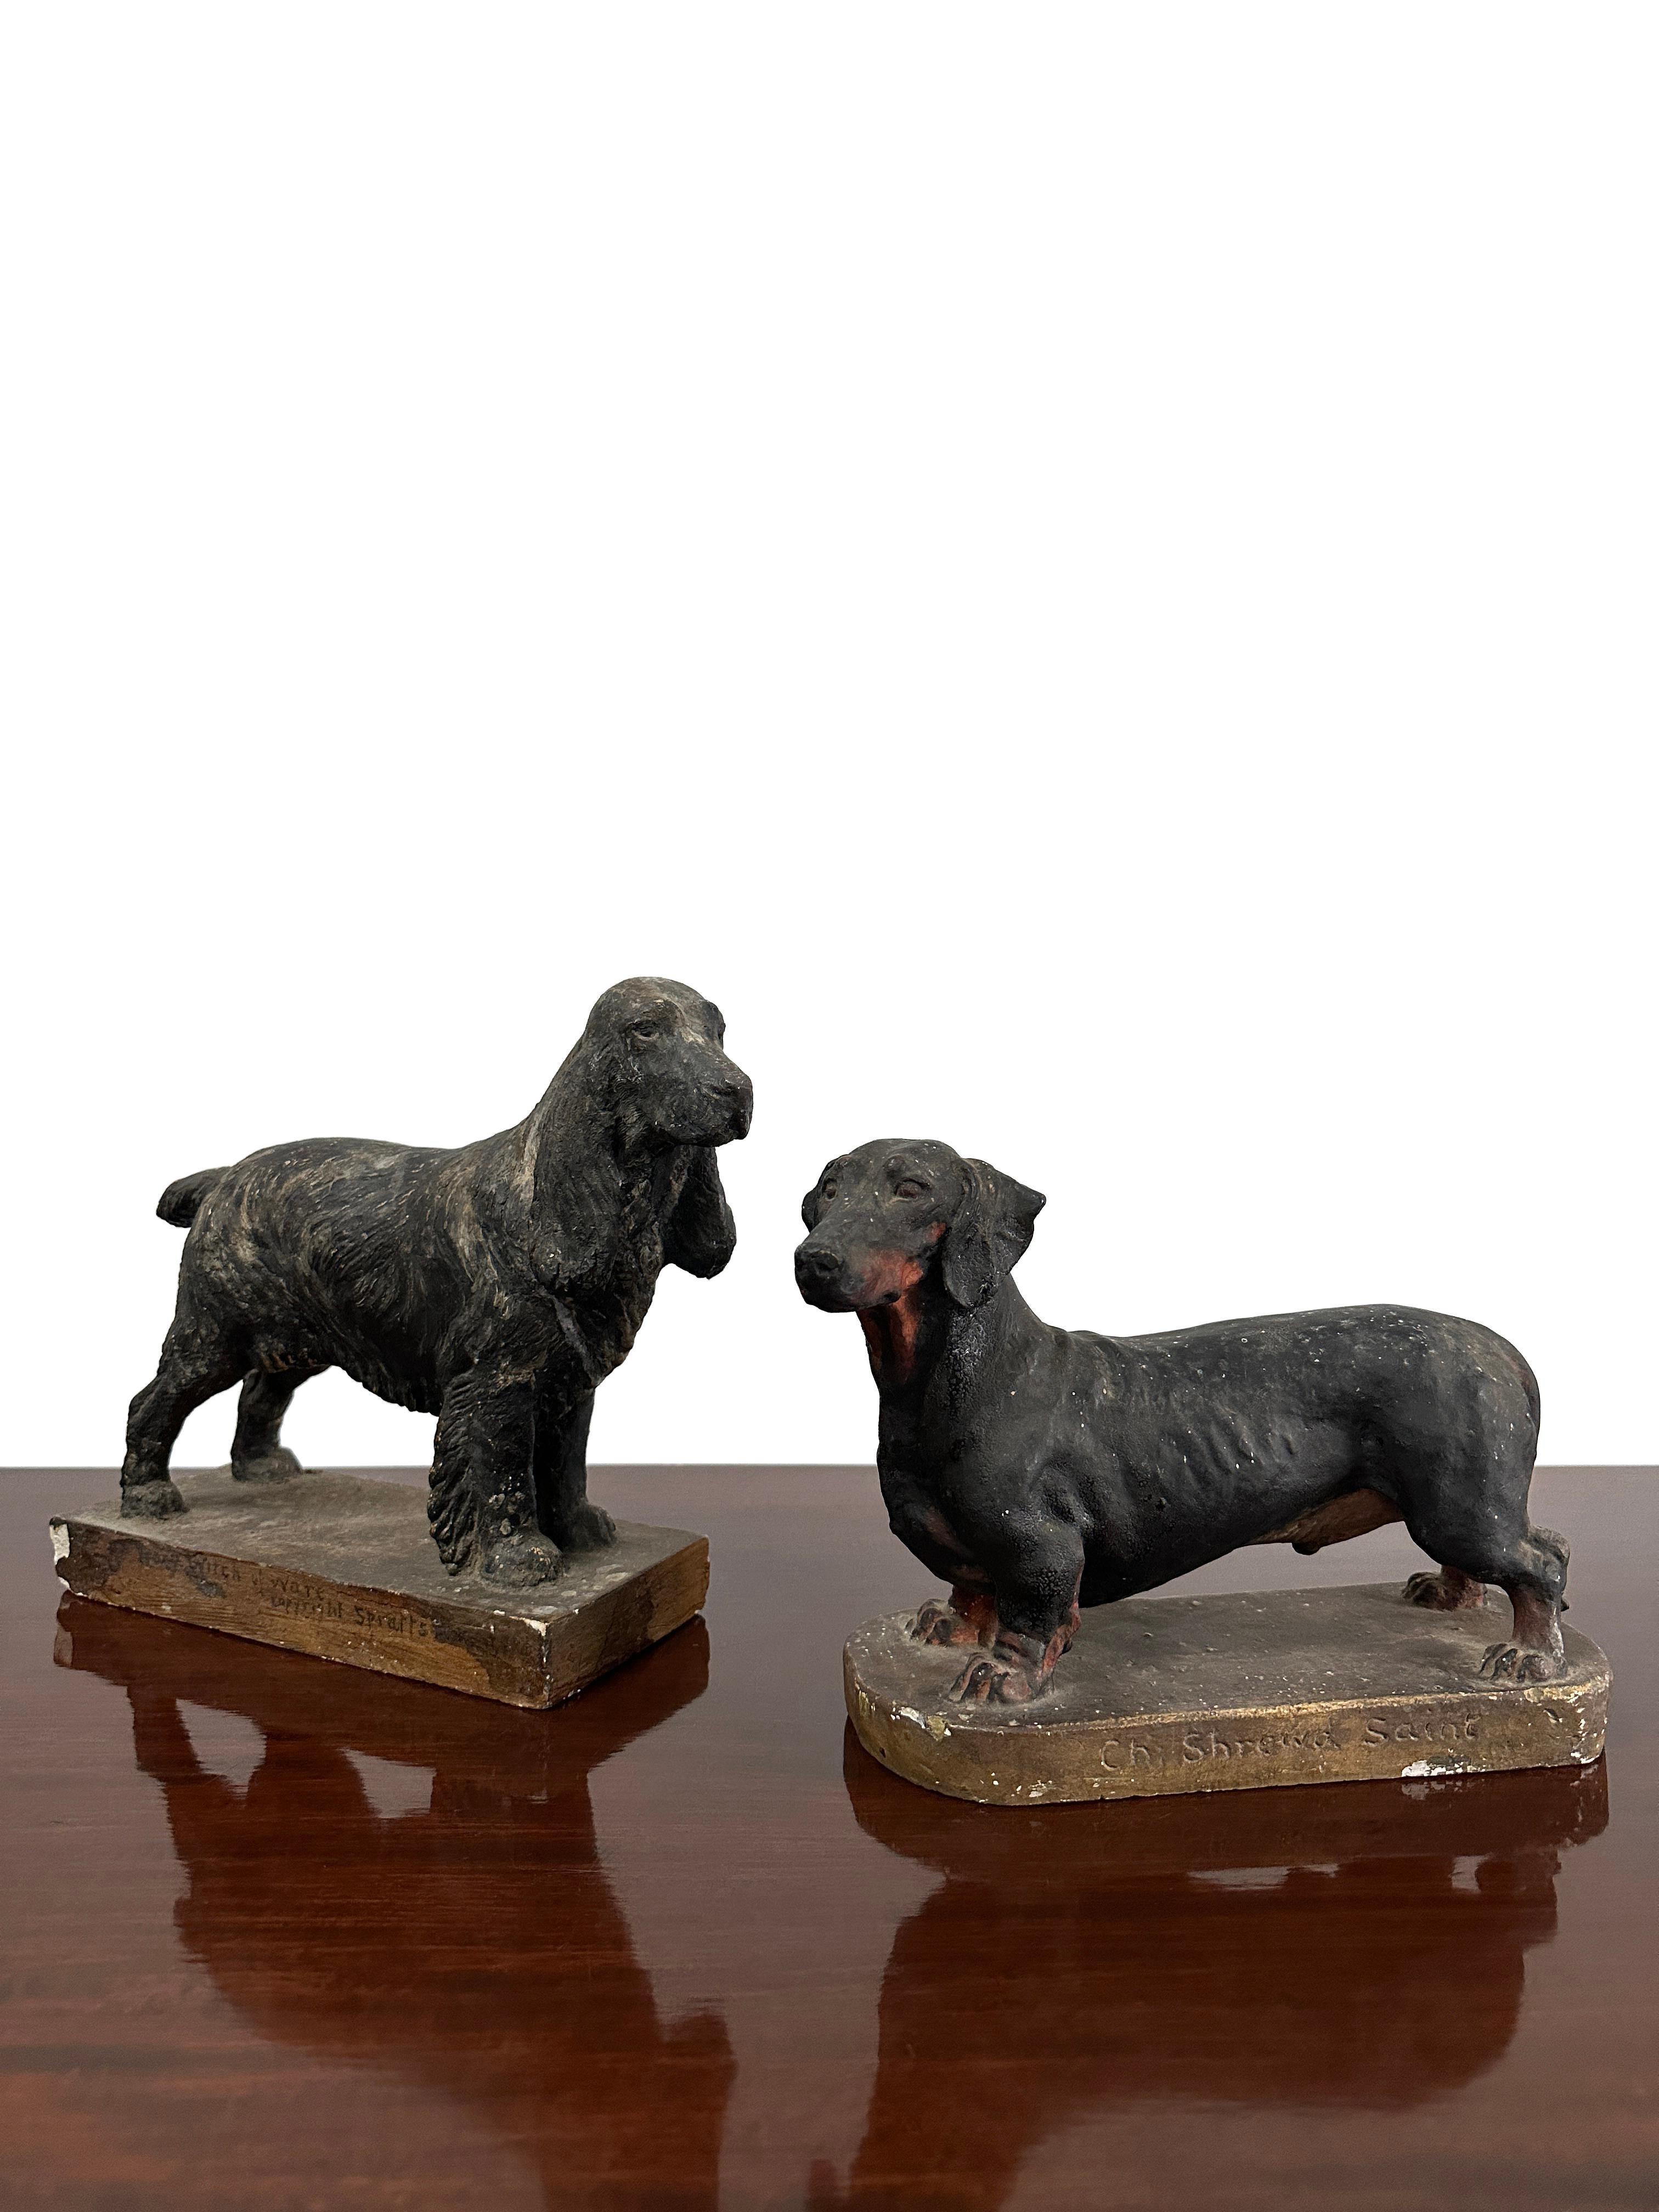 - An incredible pair of painted plaster model dogs by Frederick Thomas Daws (1878-1956), England, Mid-Twentieth Century.
- The models have a wonderful lifelike quality in regards to their design and sculptural form, both are in beautifully worn